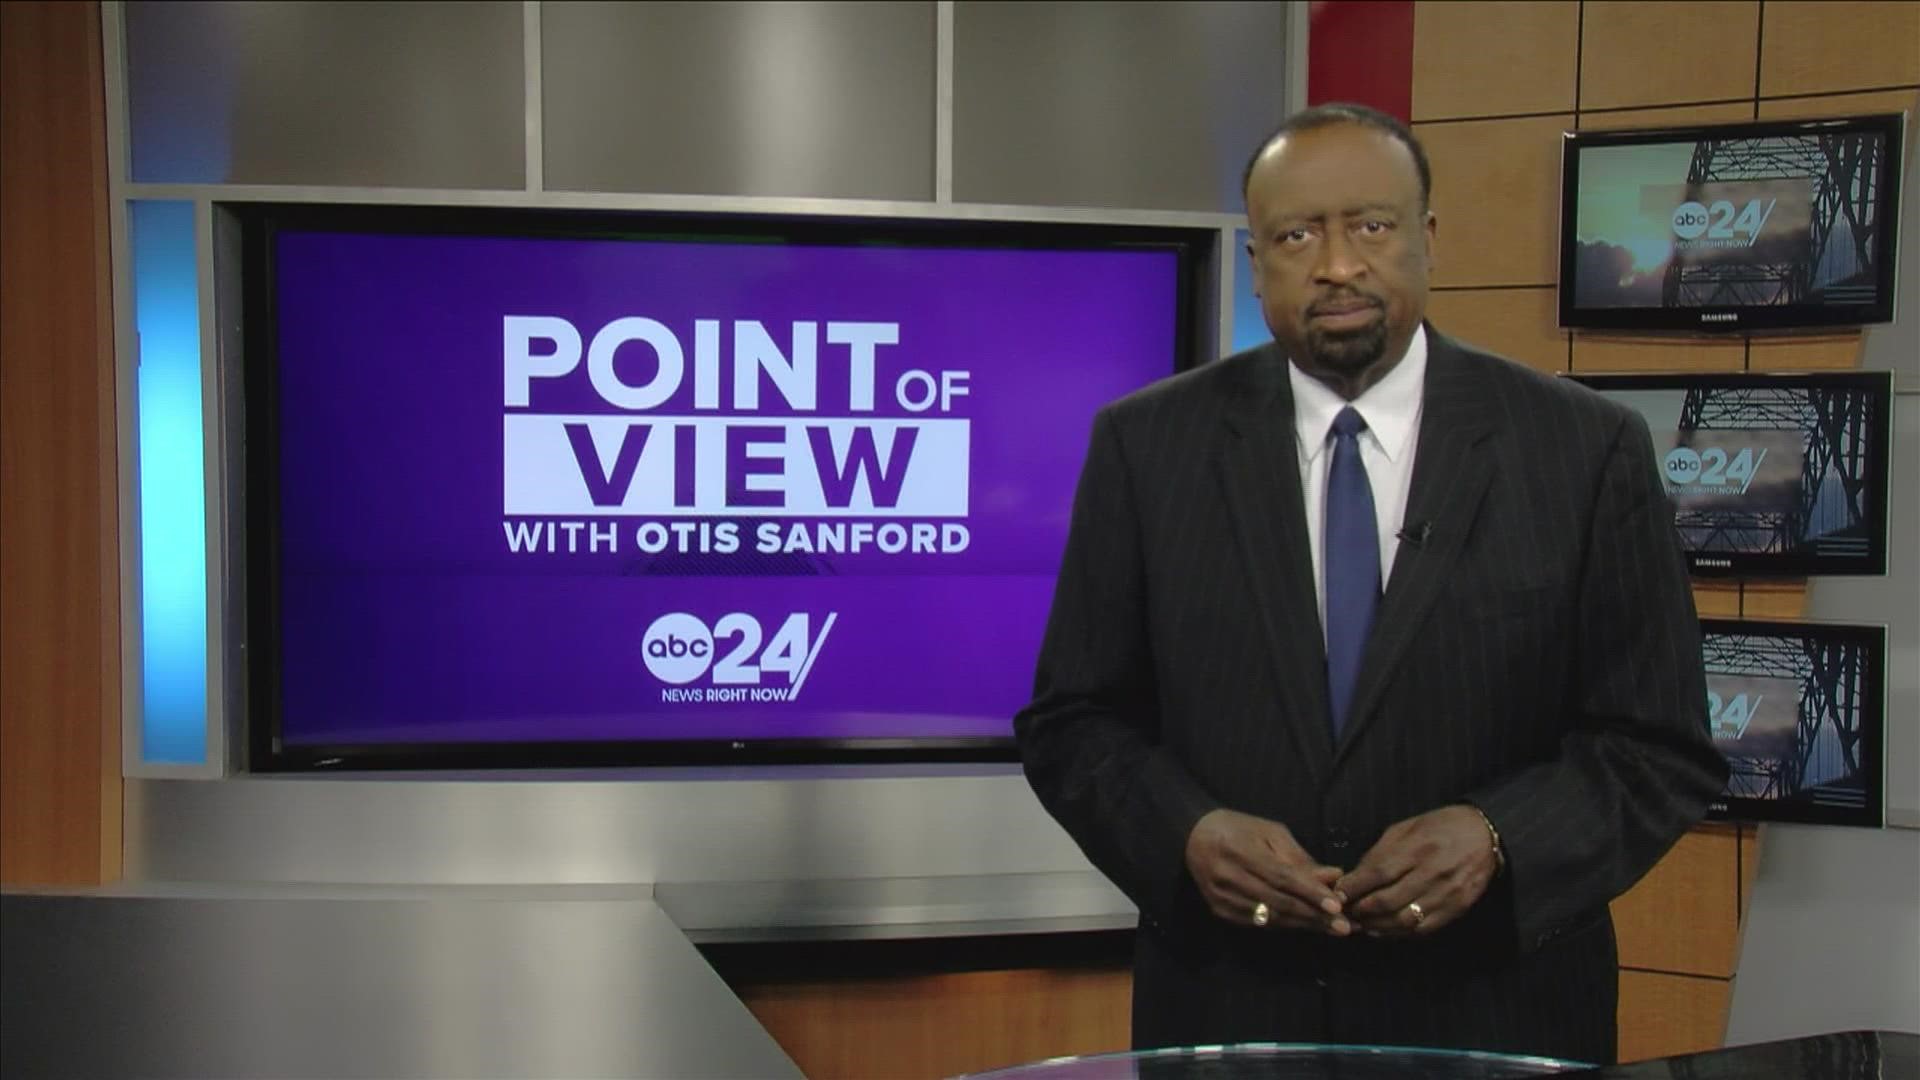 ABC 24 Political Analyst Otis Sanford delivers his Point of View on Tennessee Gov. Bill Lee's plan to reshape K-12 education in the state.